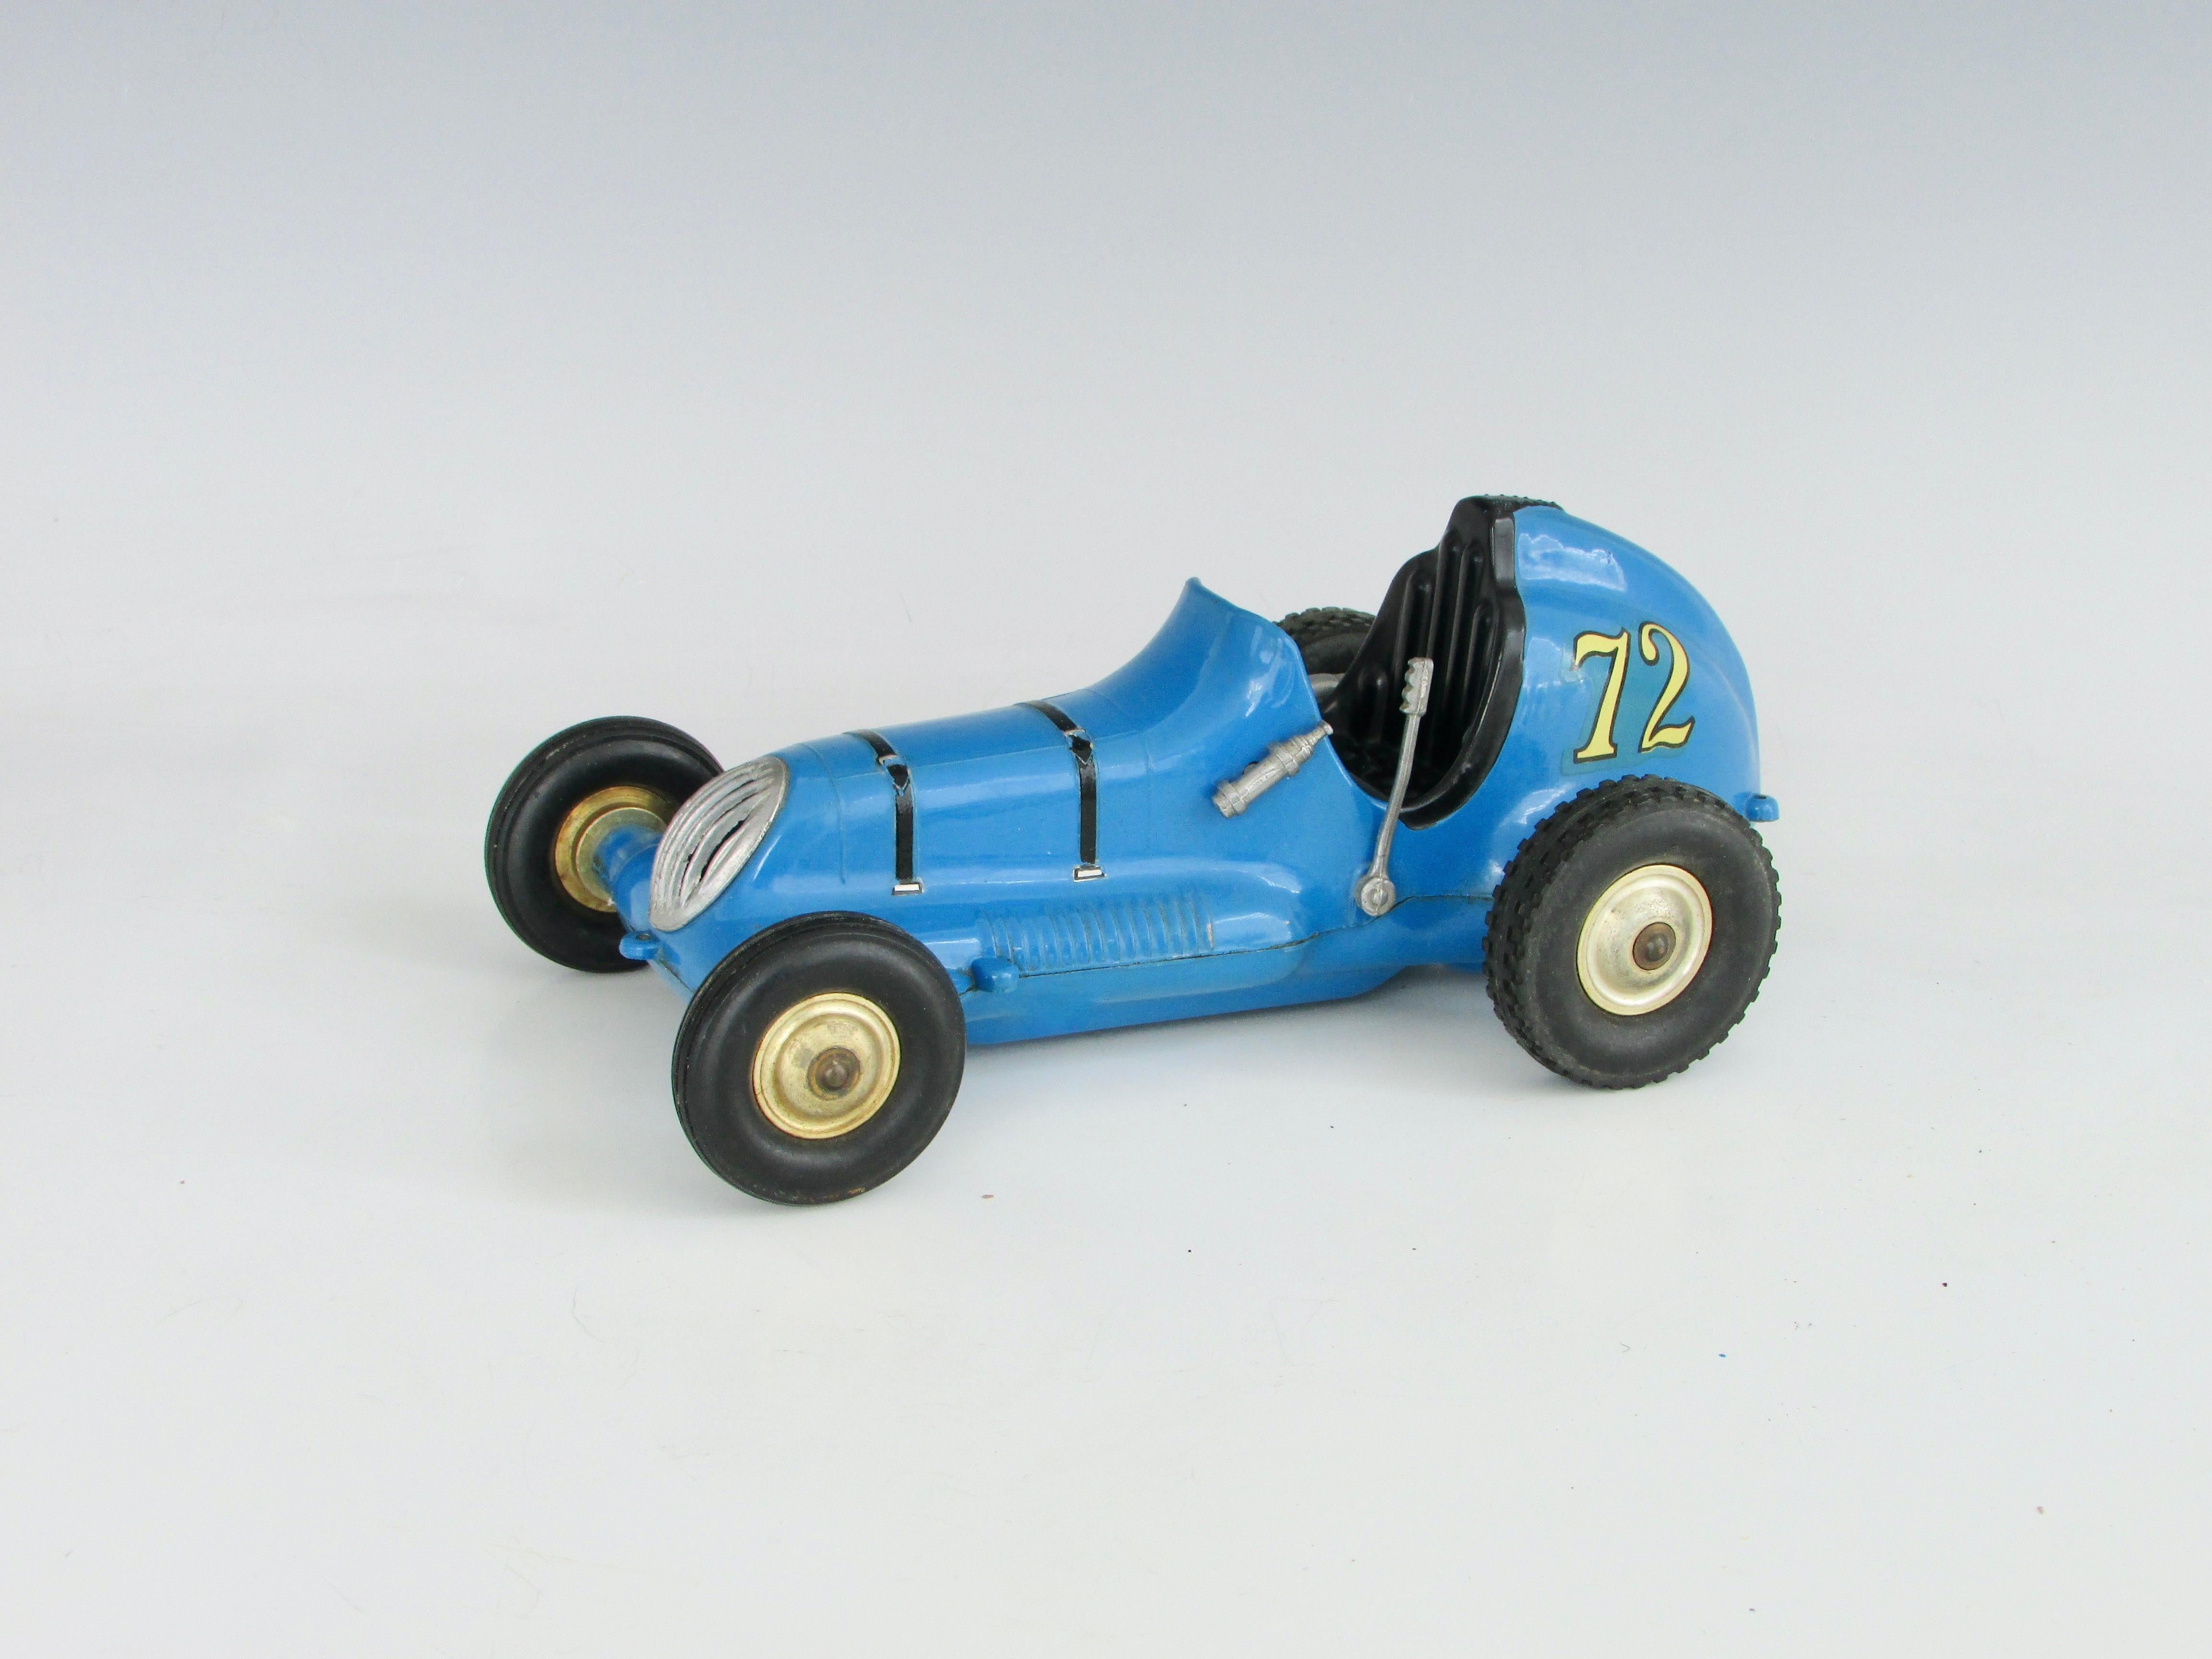 Cox Thimble drone race car. Never been motorized. Appears to not have been played with. Fine condition in original paint .